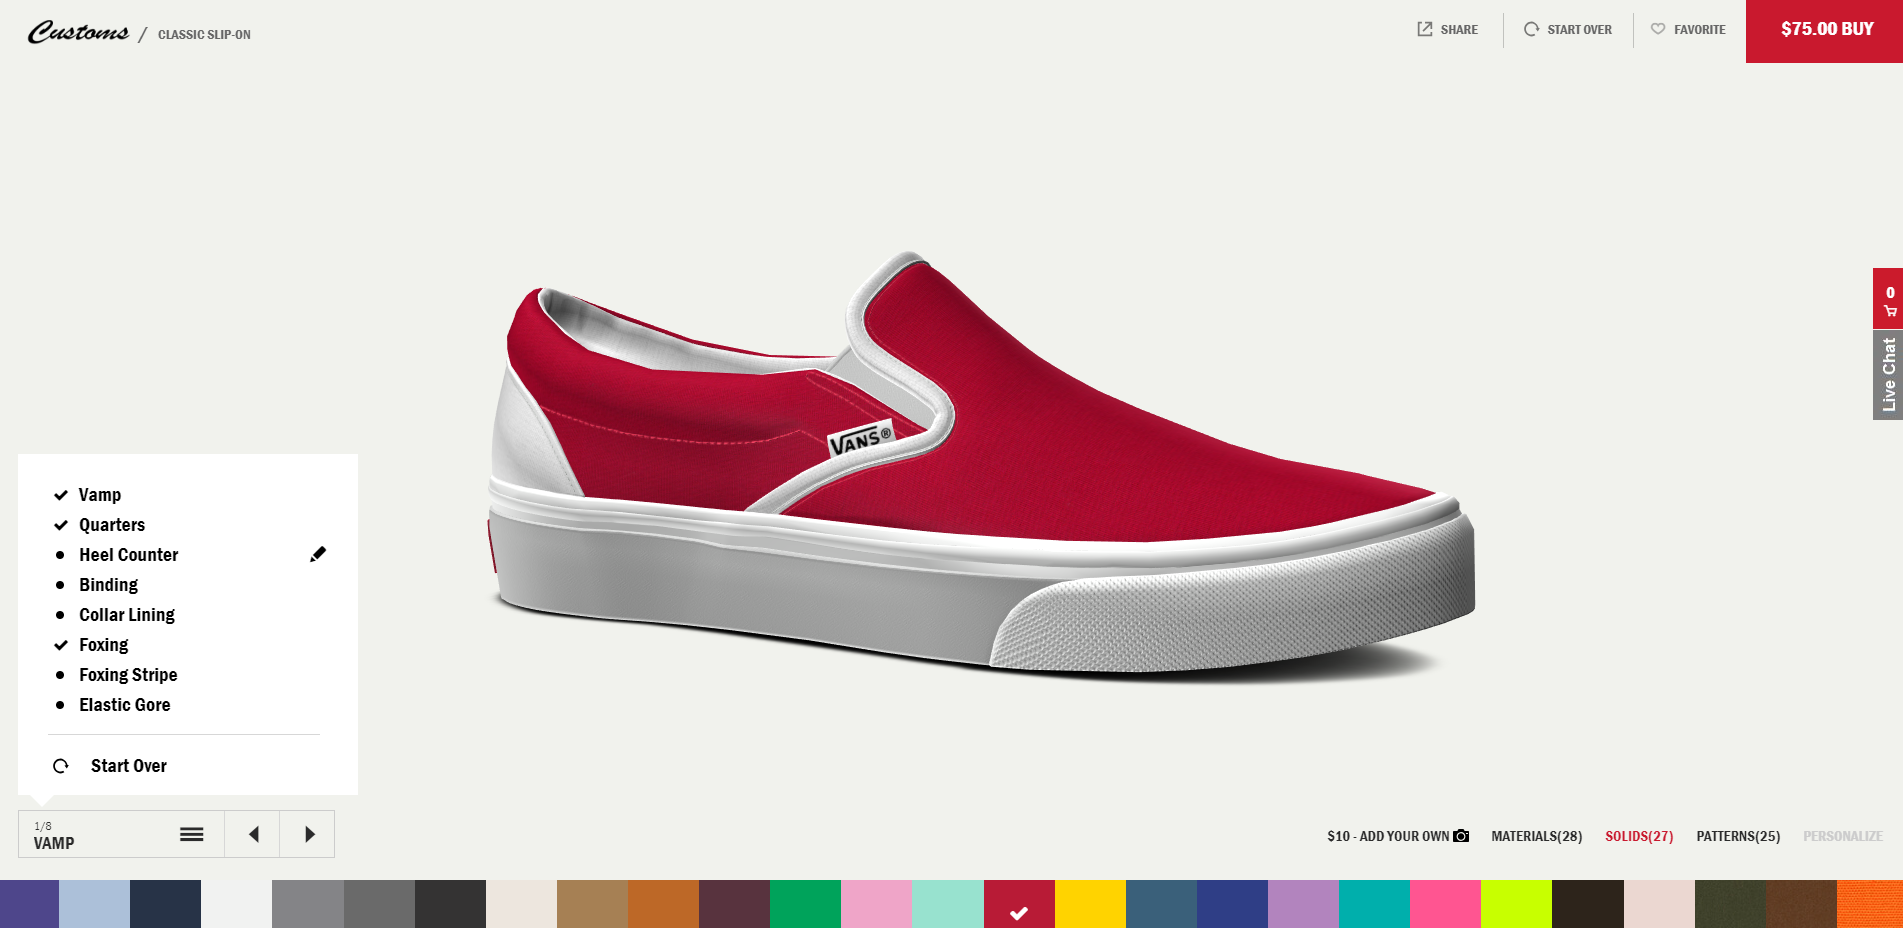 Picture of Vans website, featuring a shoe with multiple color options.